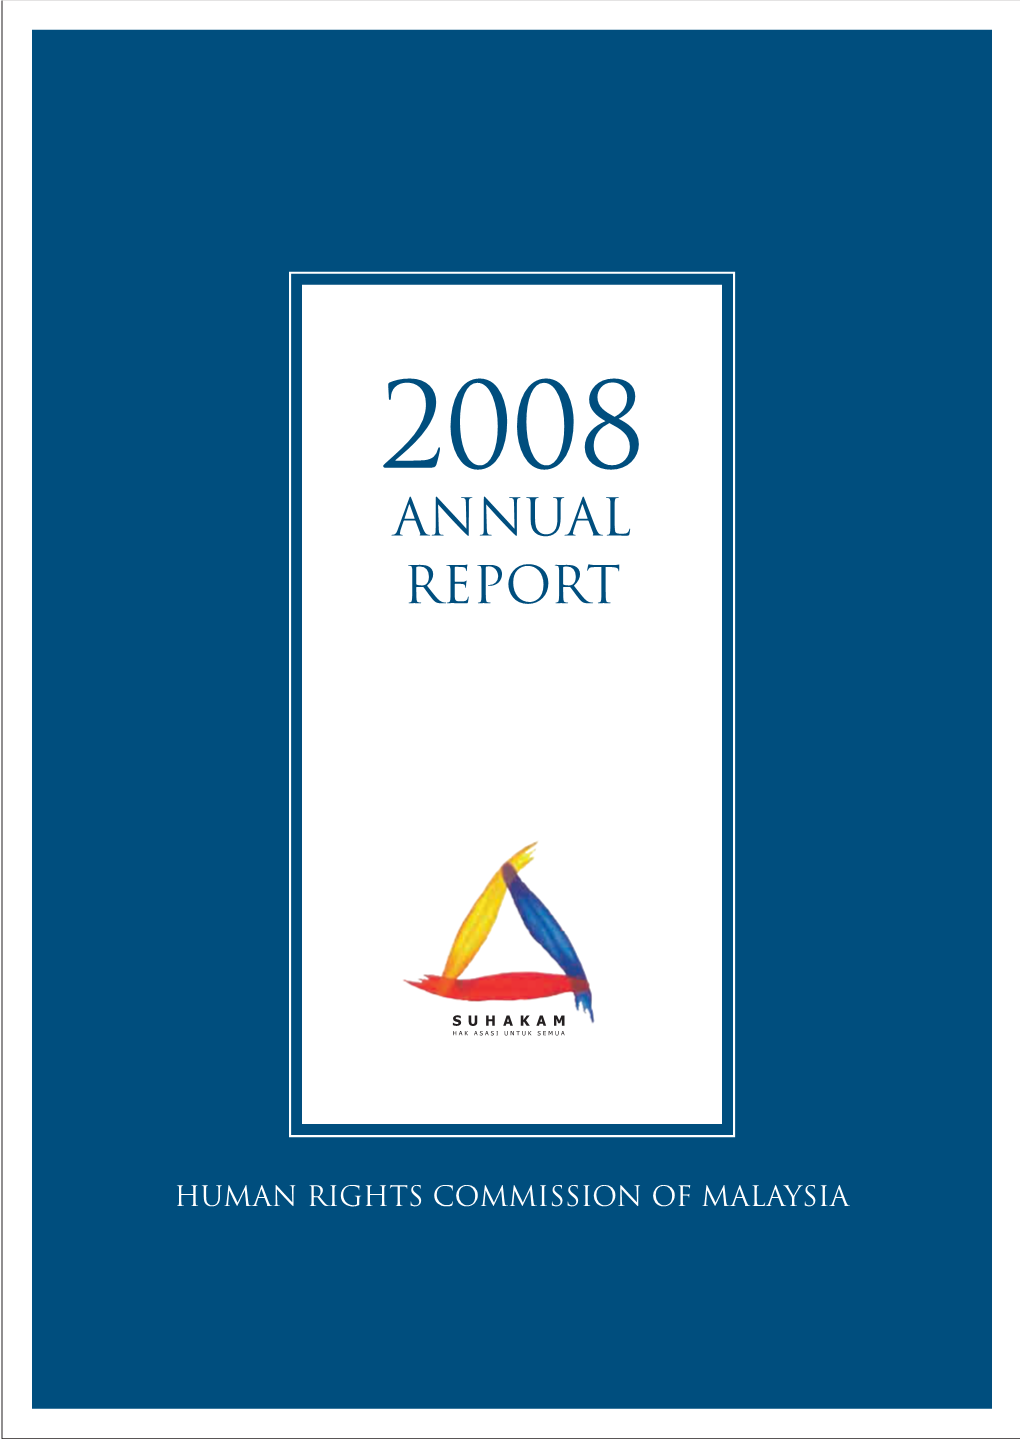 Annual Report 2008 Human Rights Commission of Malaysia